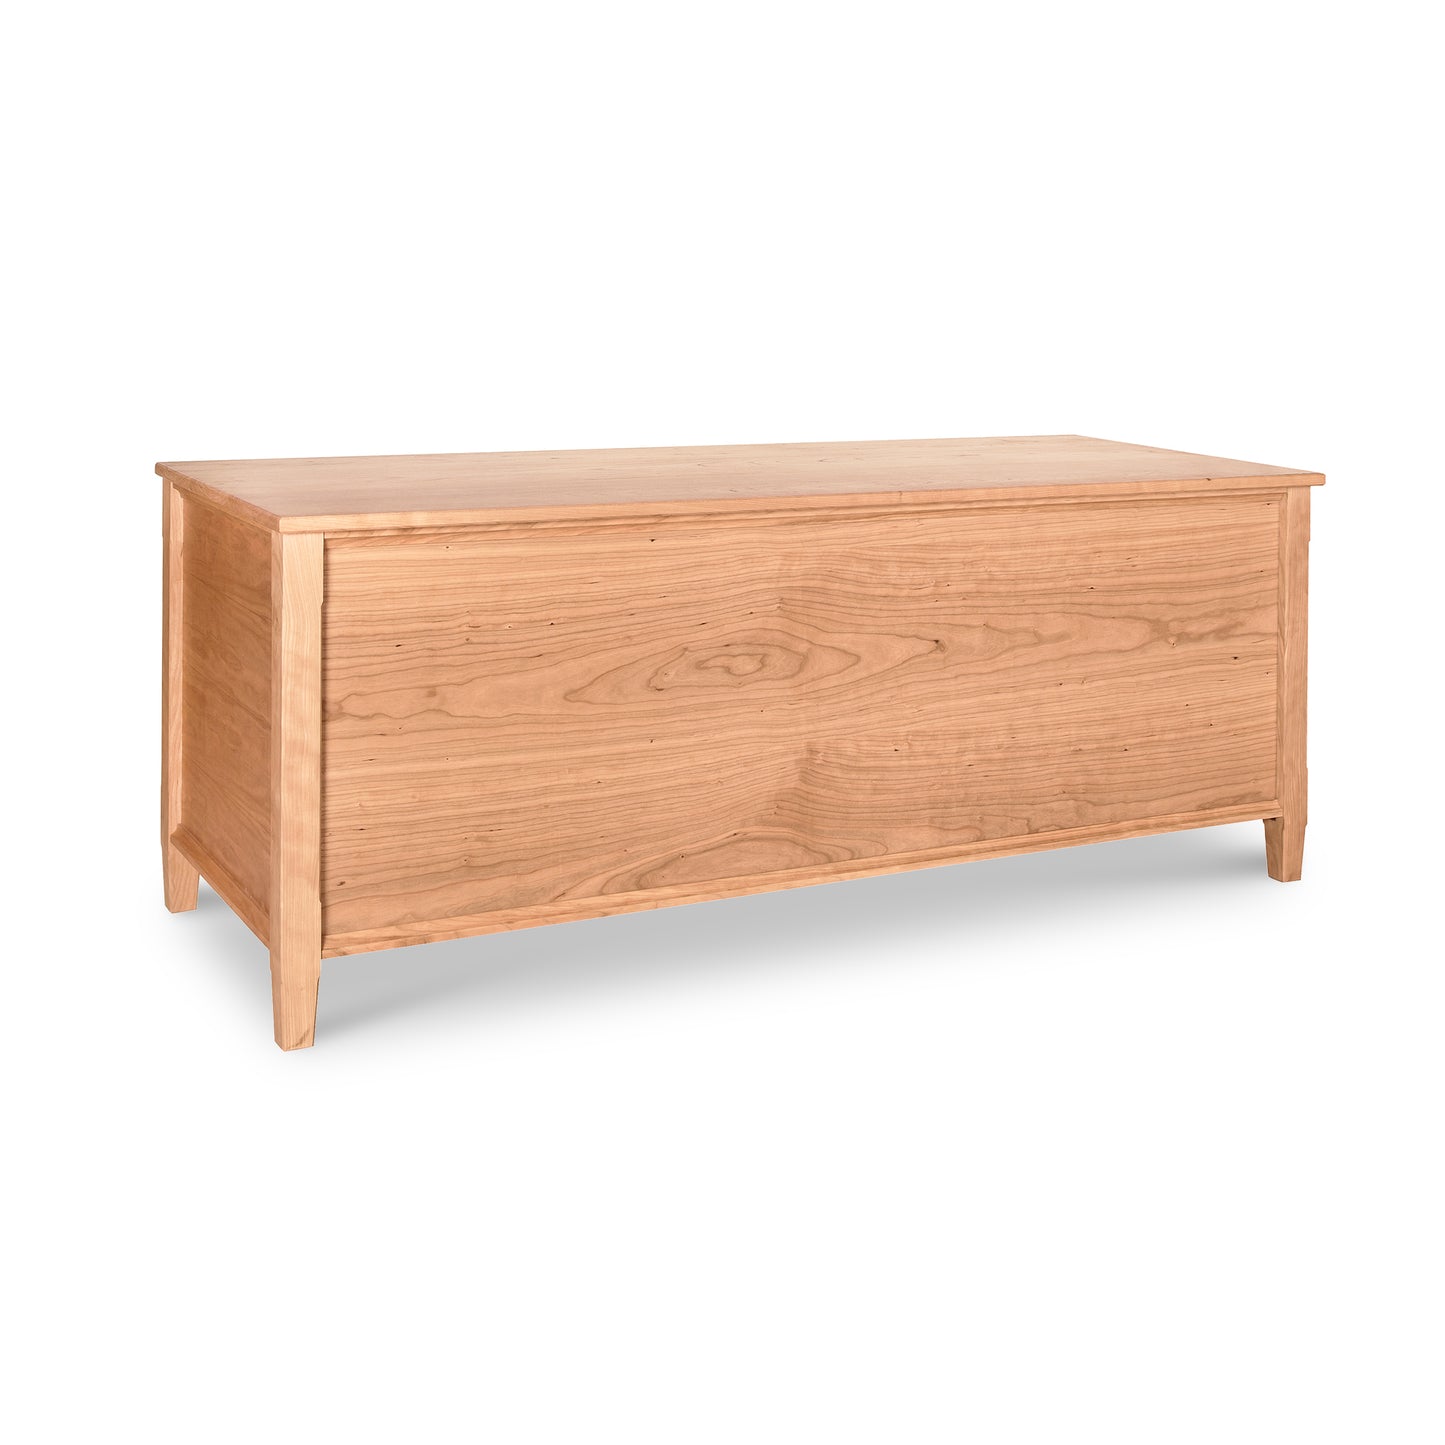 An eco-friendly Vermont Shaker Blanket Chest with a lid on it, made by Maple Corner Woodworks.